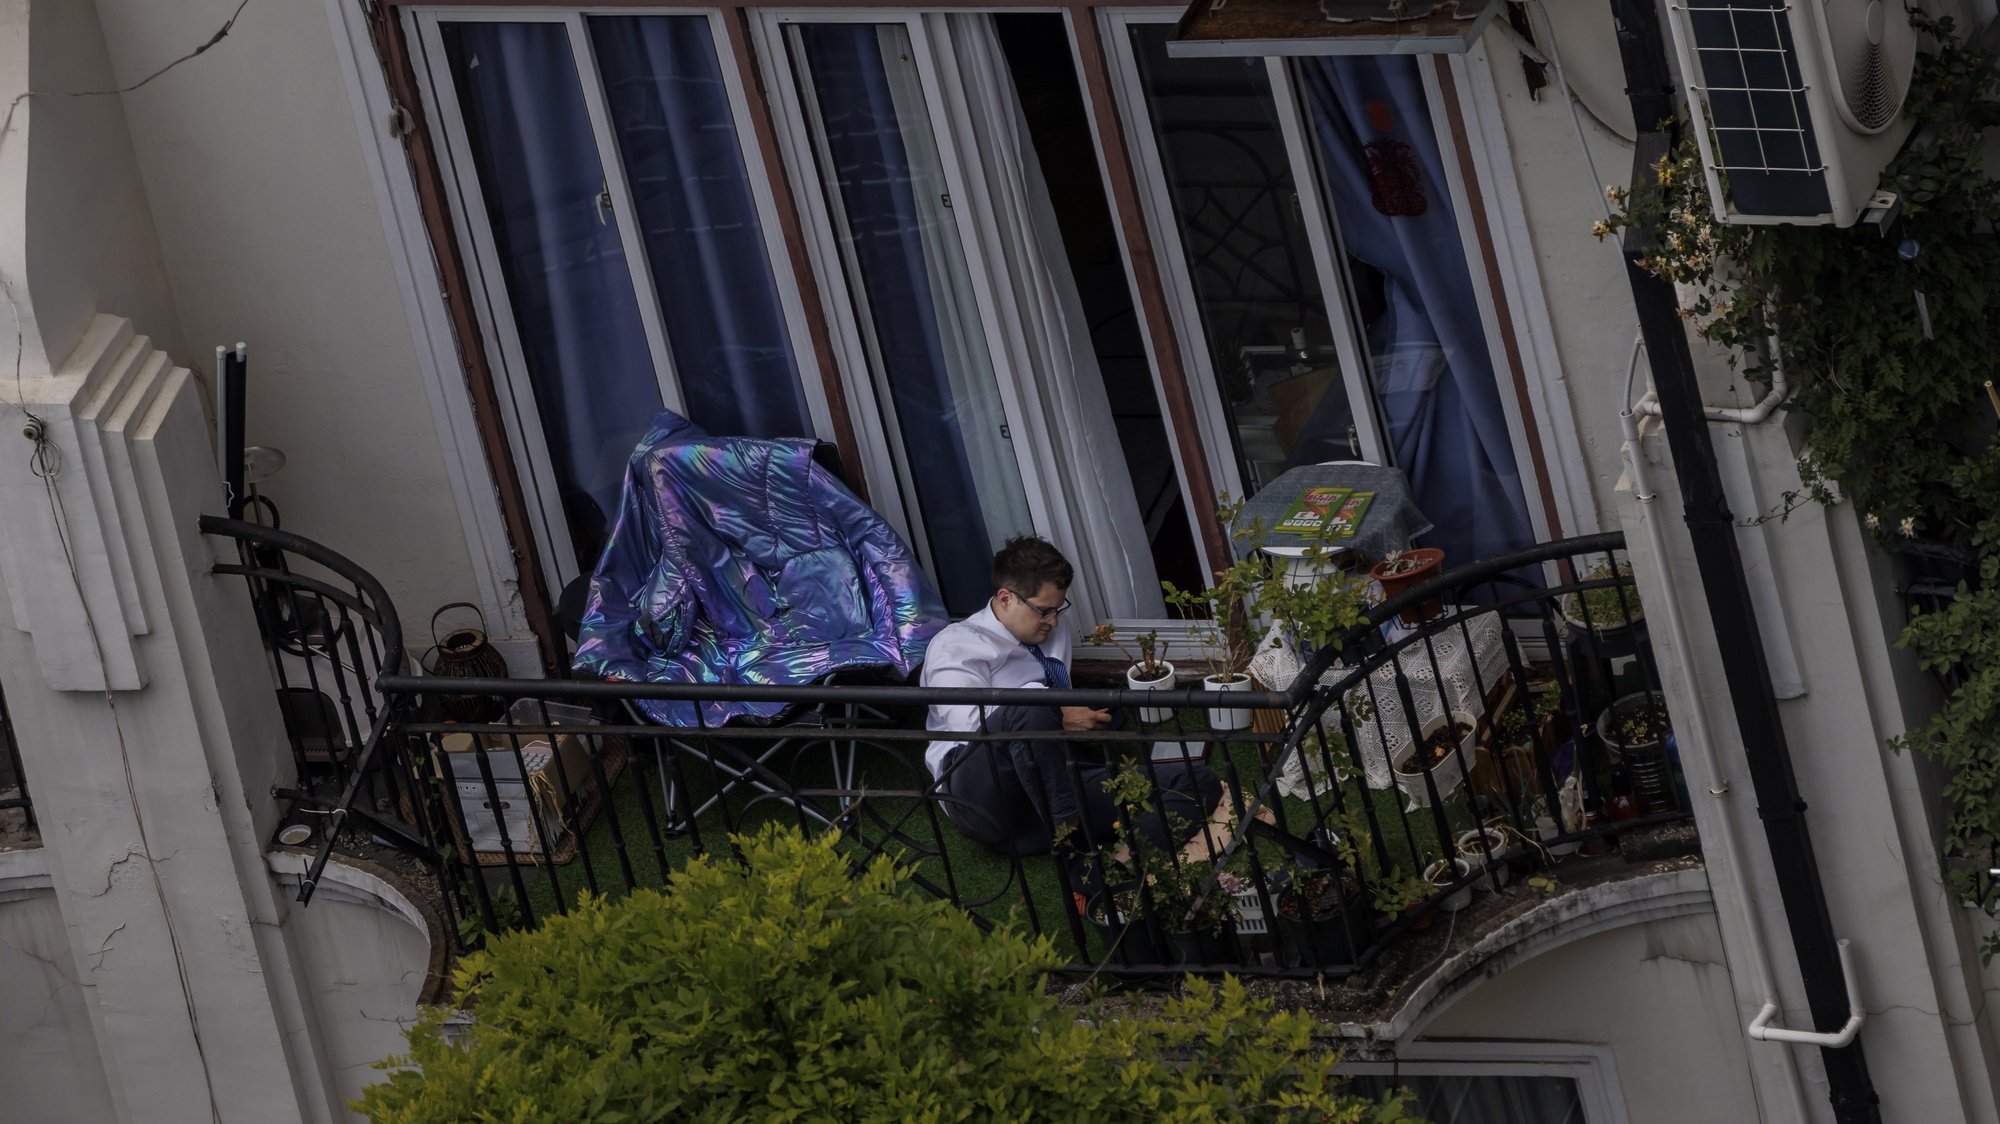 epa09952127 A man sits on his balcony at residential compound in quarantine, amid the ongoing Covid-19 lockdown in Shanghai, China, 17 May 2022. Shanghai city reported one coronavirus-related death, 77 locally transmitted cases, and 746 local asymptomatic infections, according to the Shanghai Health Commission on 17 May 2022. Shanghai reached the &#039;Zero COVID&#039; status, with no new COVID-19 cases outside of quarantine zones. Shanghai Vice Mayor Zong Ming announced a day earlier that life and business will return to normal between 01 June and mid-to-late next month as the city&#039;s pandemic has been put under control, and the city is now following a three-phase opening up plan.  EPA/ALEX PLAVEVSKI